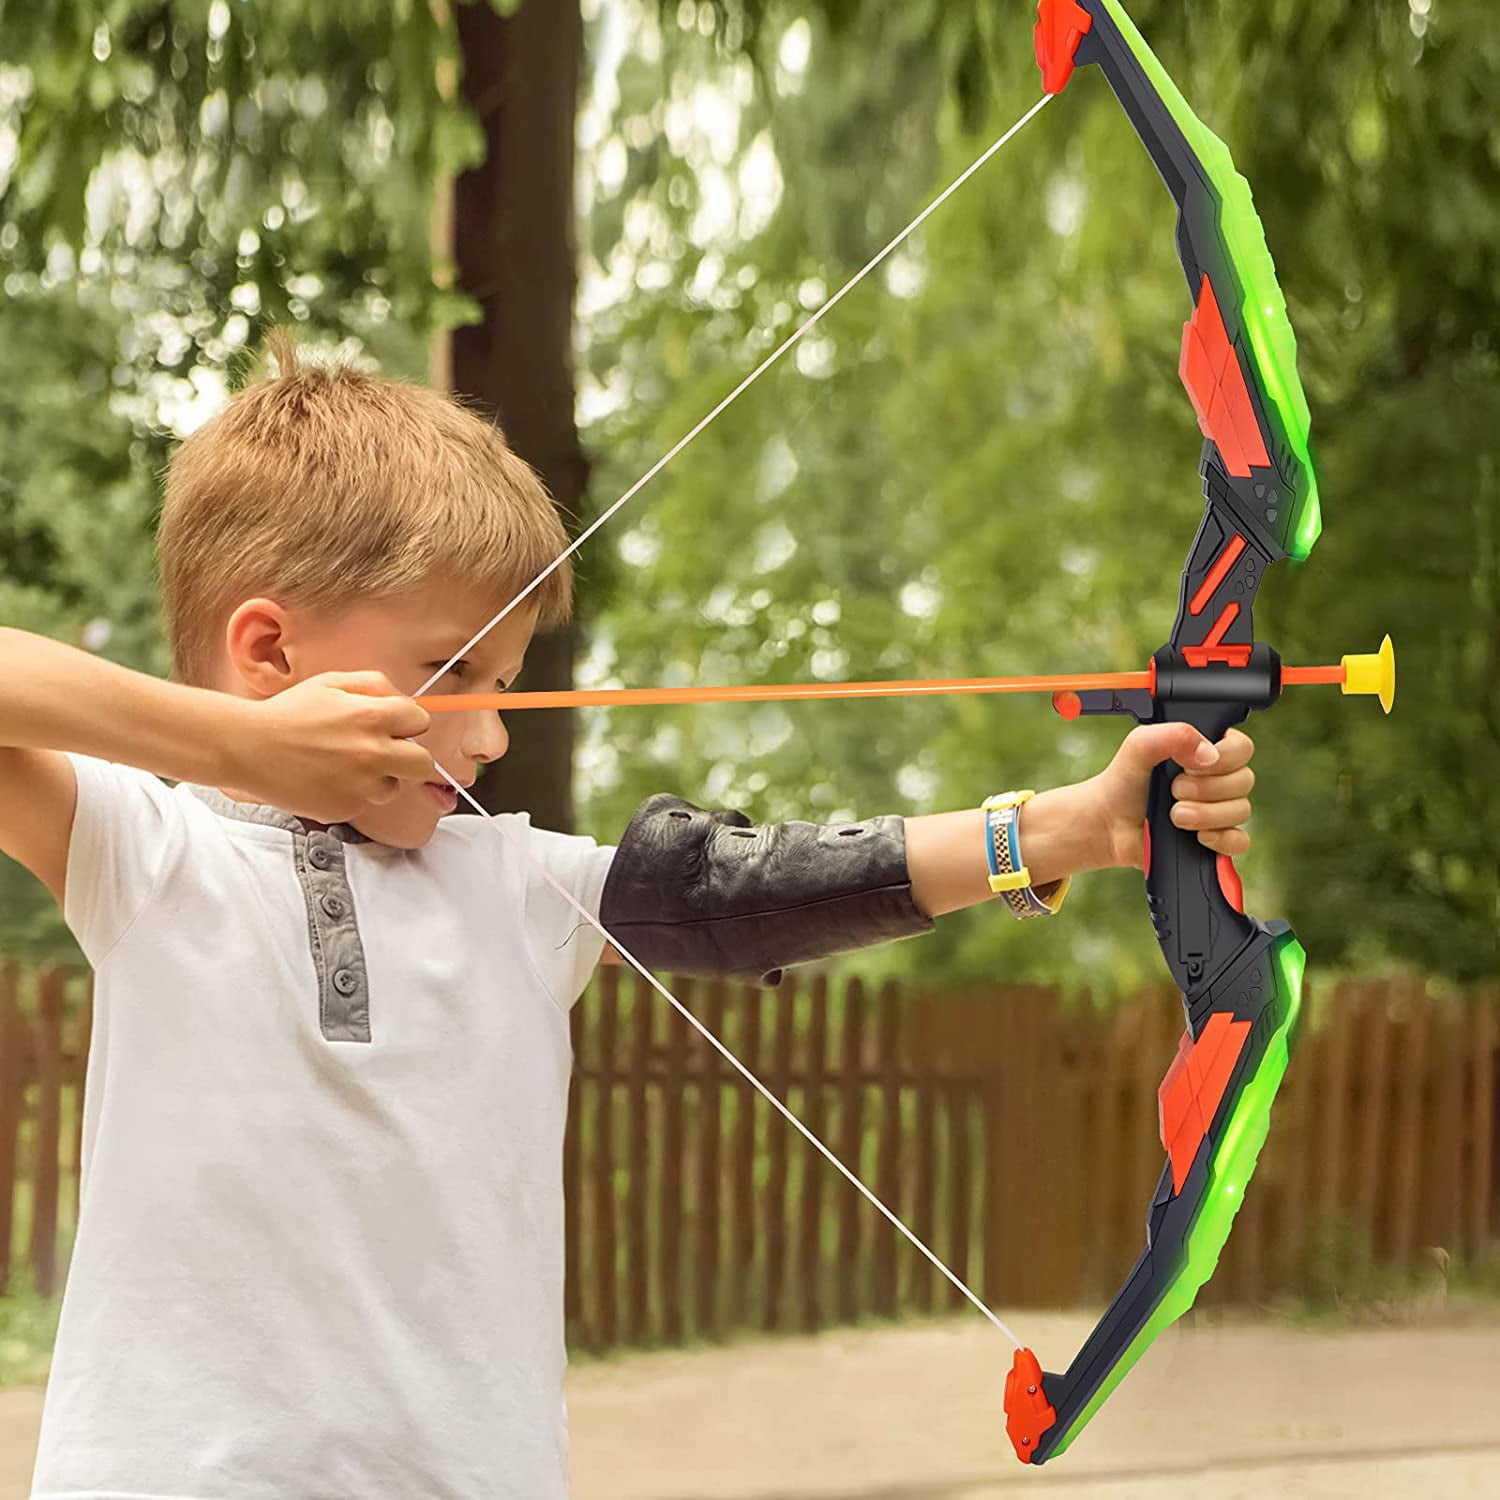 Bow and Arrow for Kids LED Light Up Archery Sets Outdoor Toys establish new hobbies among boys and girls durable with long-lasting performance ABS 